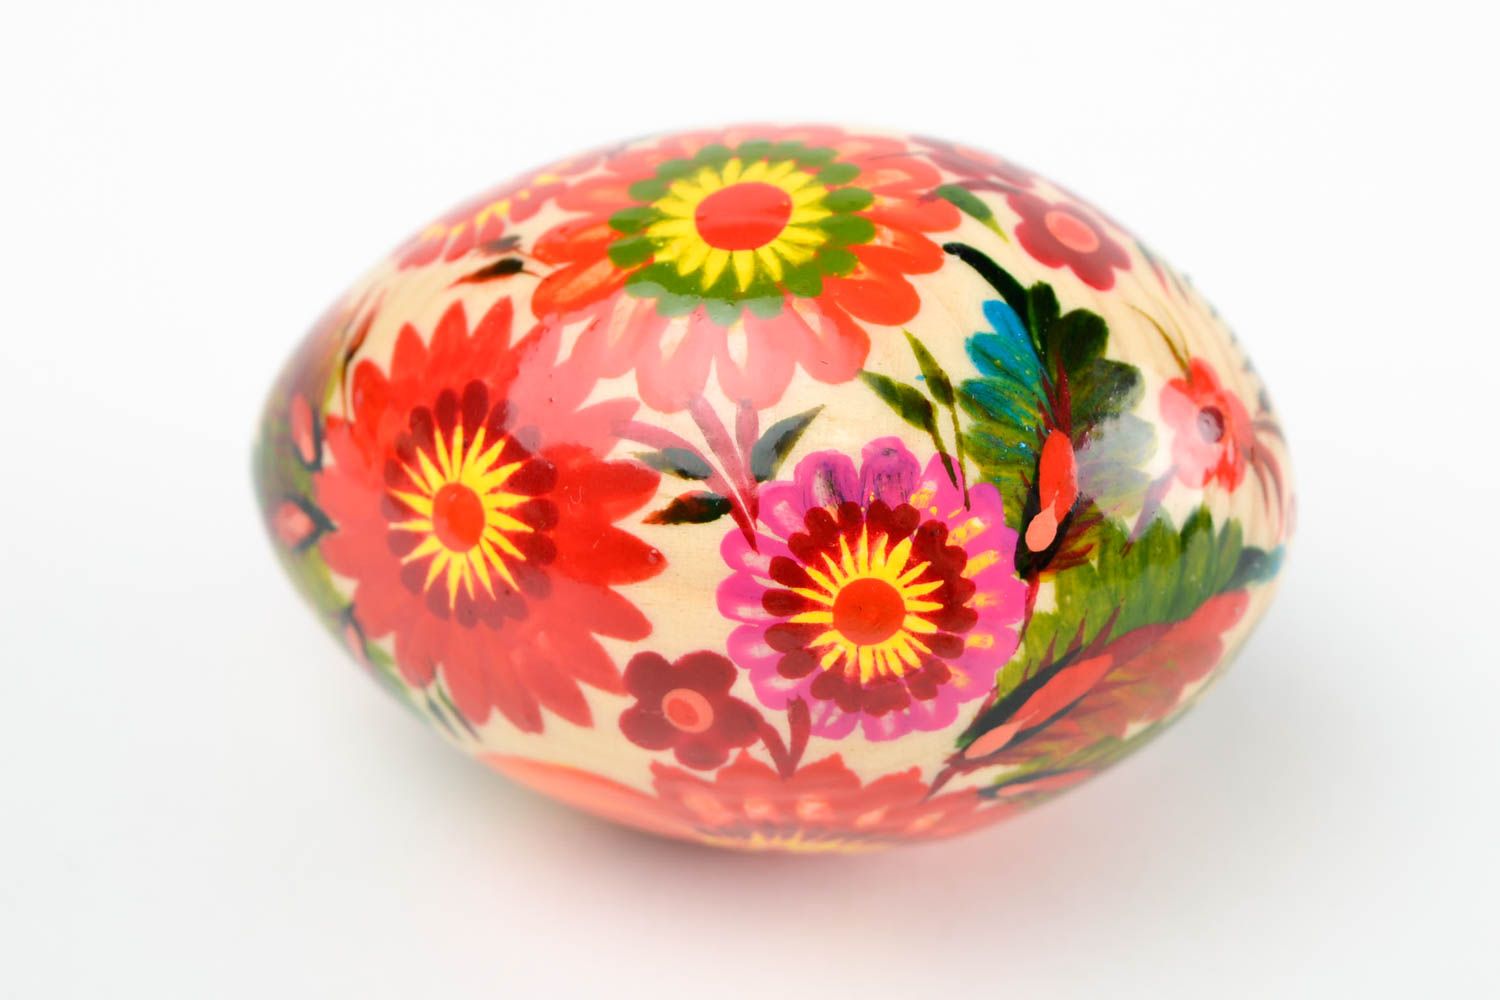 Unusual painted wooden egg handmade Easter egg room ideas decorative use only photo 5